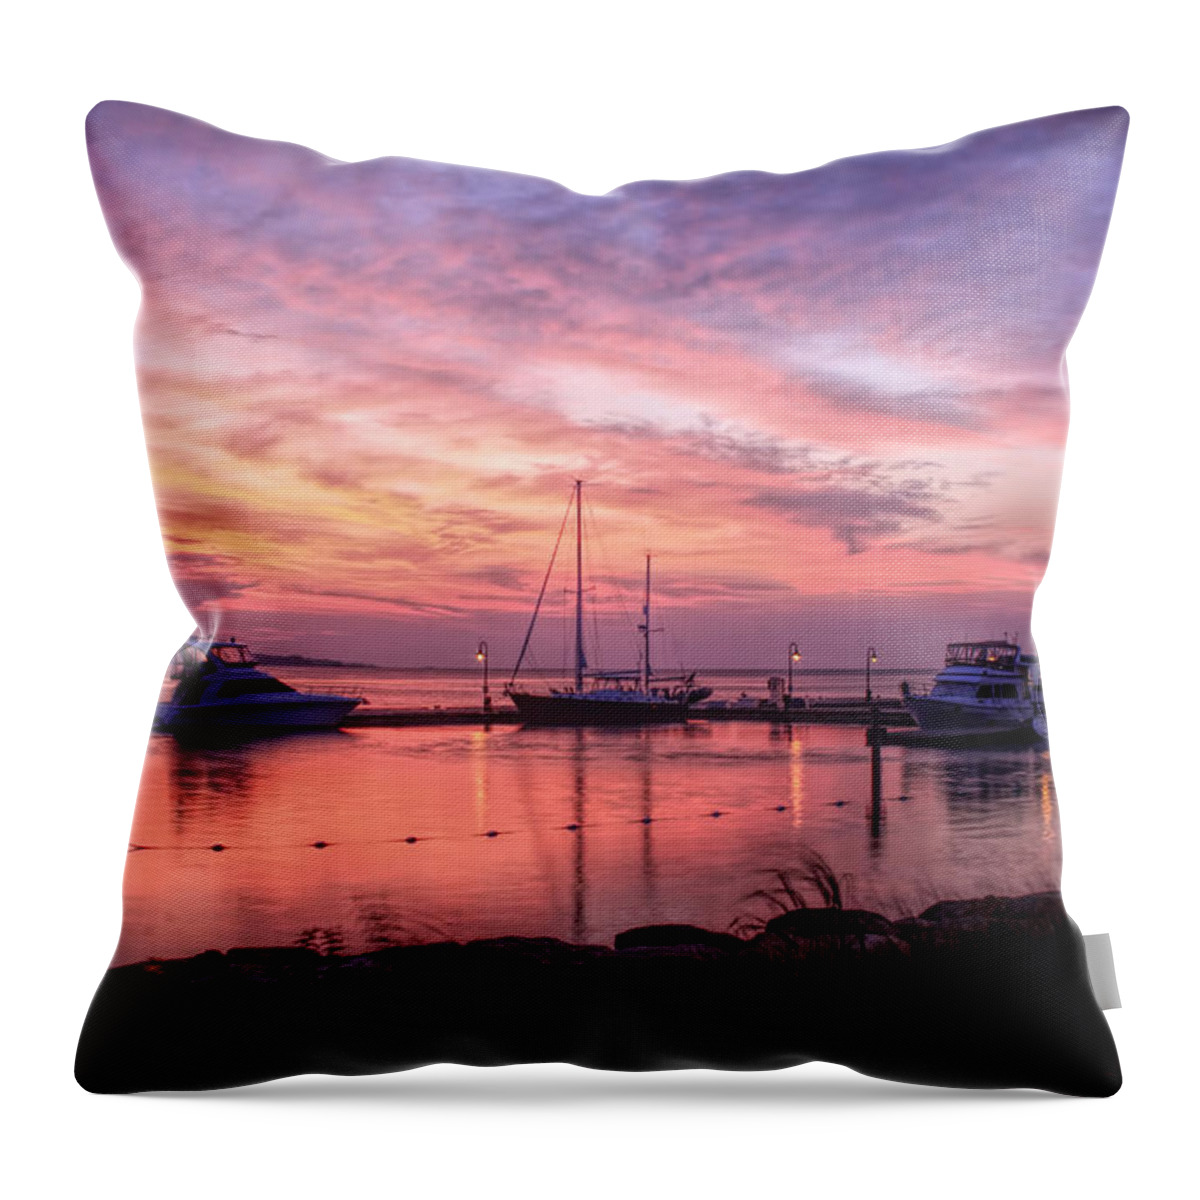 Pictures Of Sunrise Throw Pillow featuring the photograph A New Day Dawning by Ola Allen